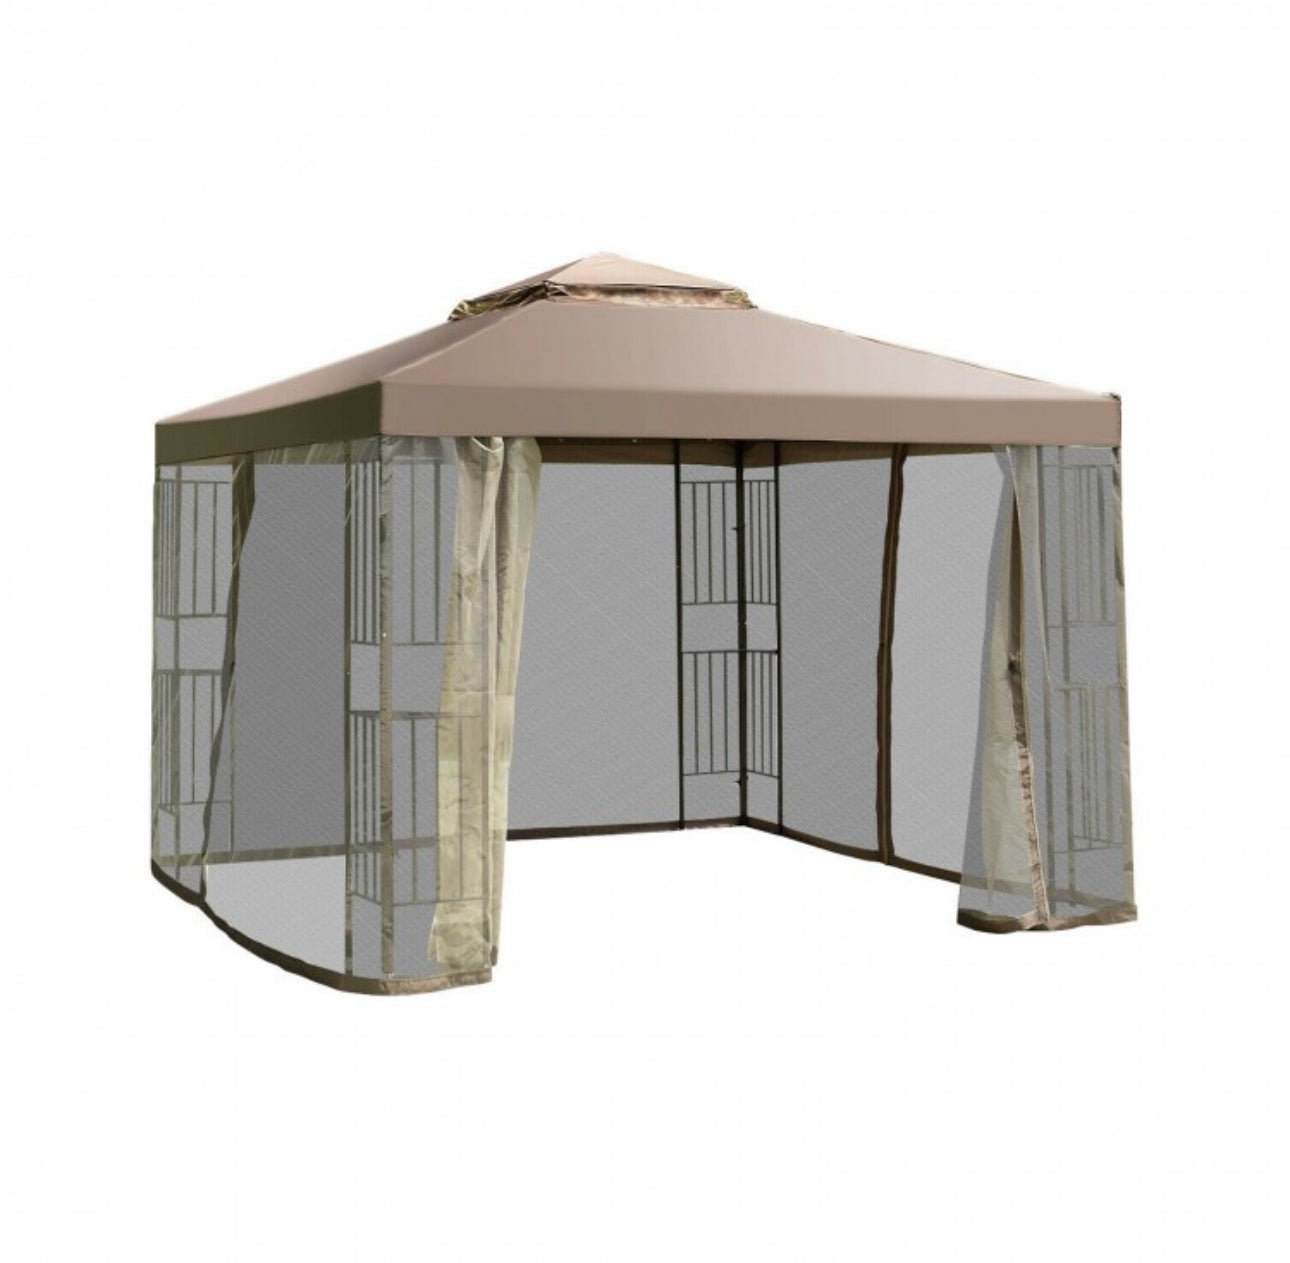 Heavy Duty Classy Awning Patio Structure Canopy Tent 10x10ft | No Screws For Structure Required | Easy Set Up | Waterproof | Weather Resistant